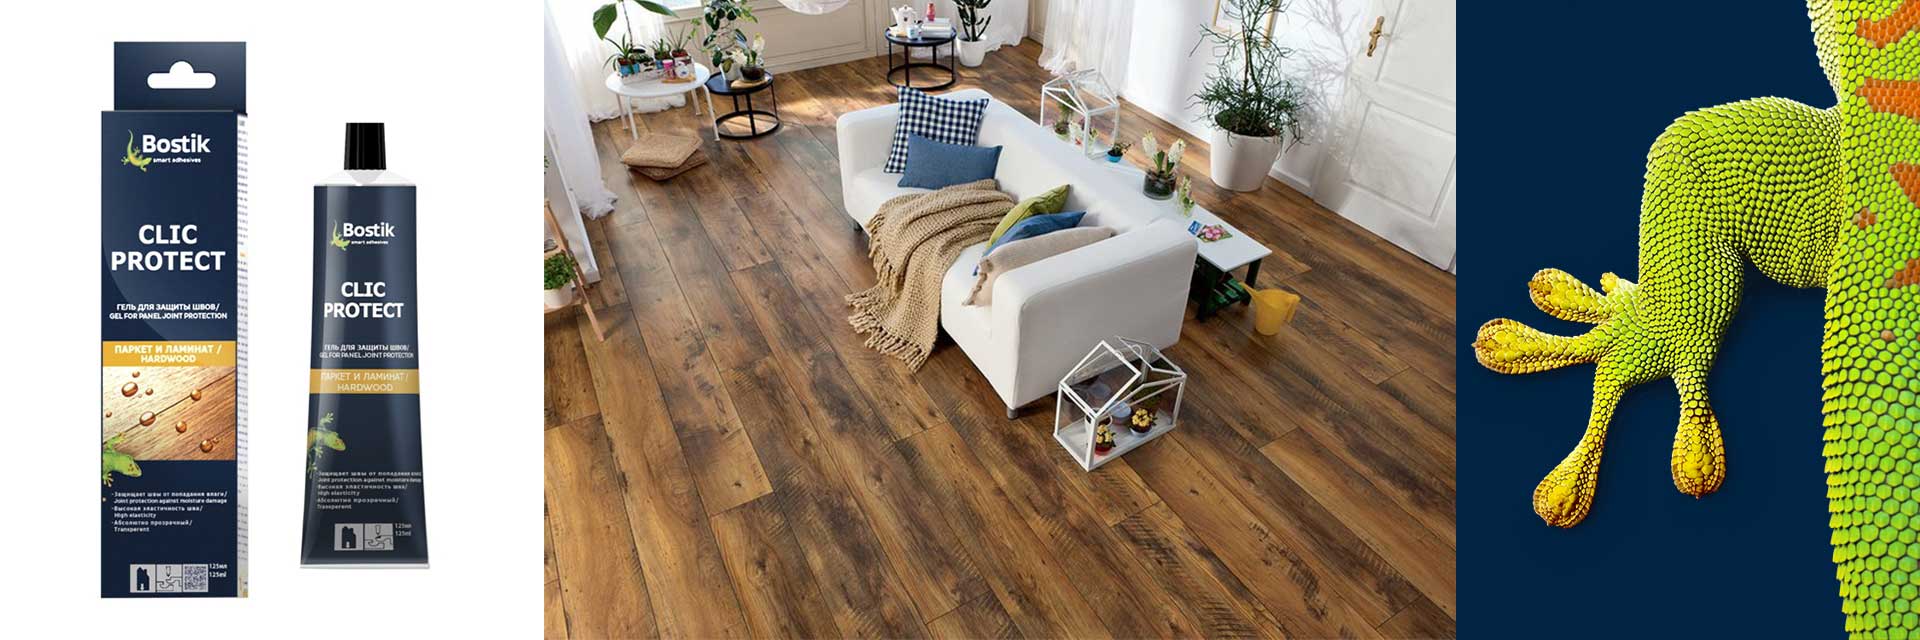 Bostik DIY Russia news how to protect your laminated floor article banner image